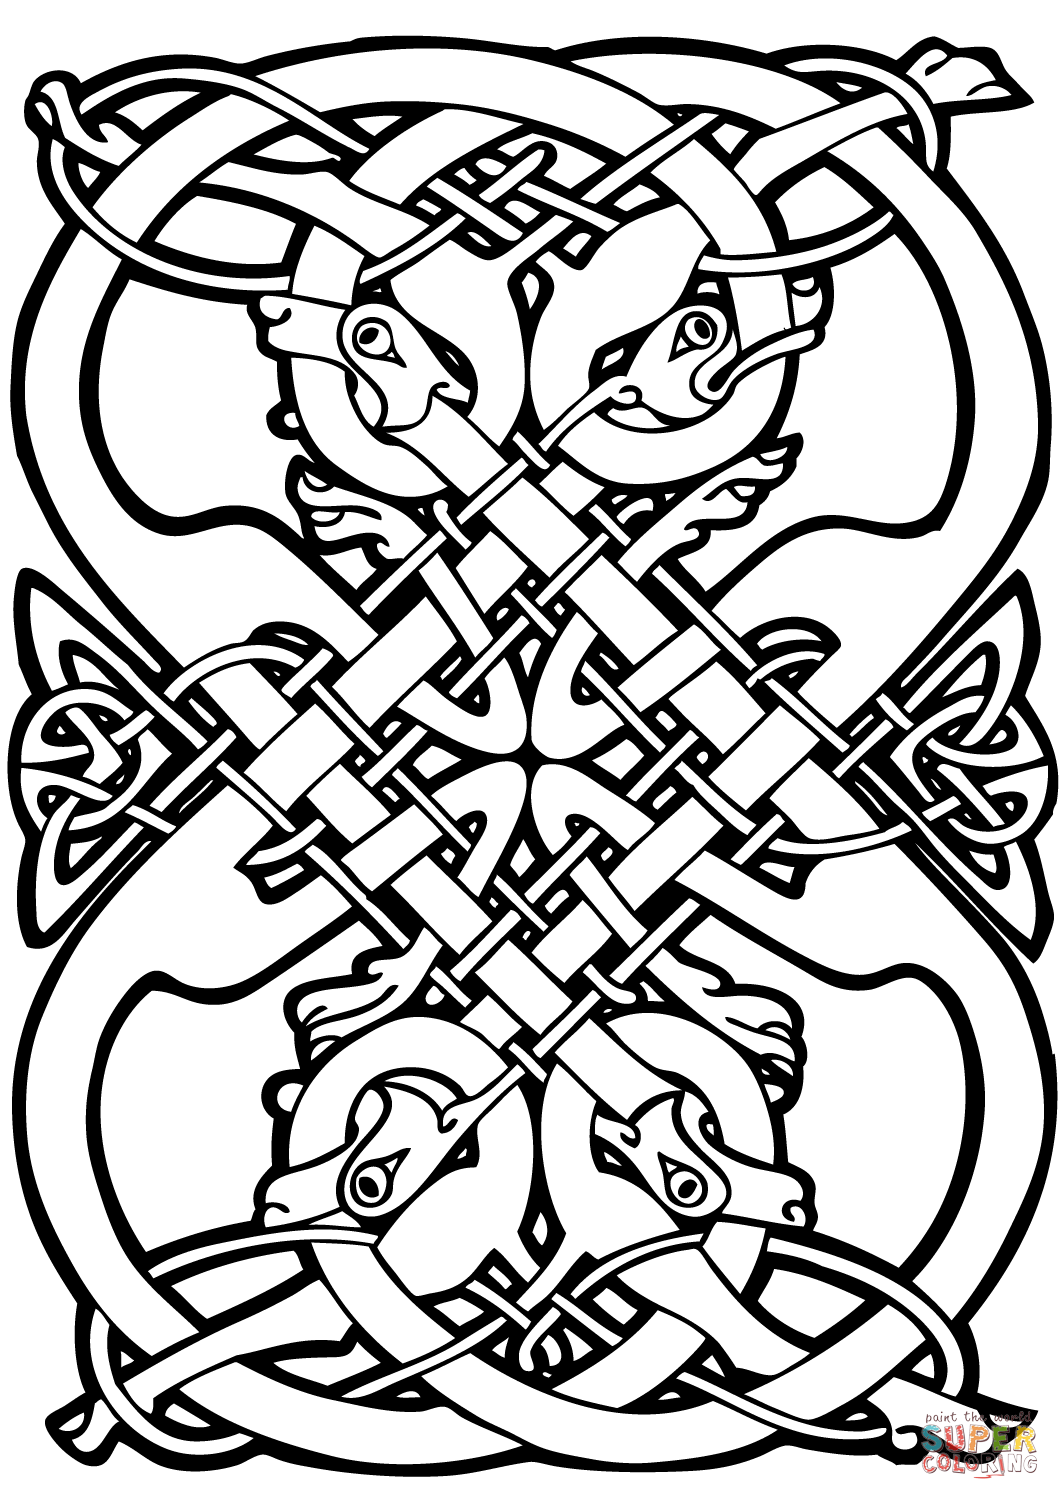 Celtic design coloring page free printable coloring pages